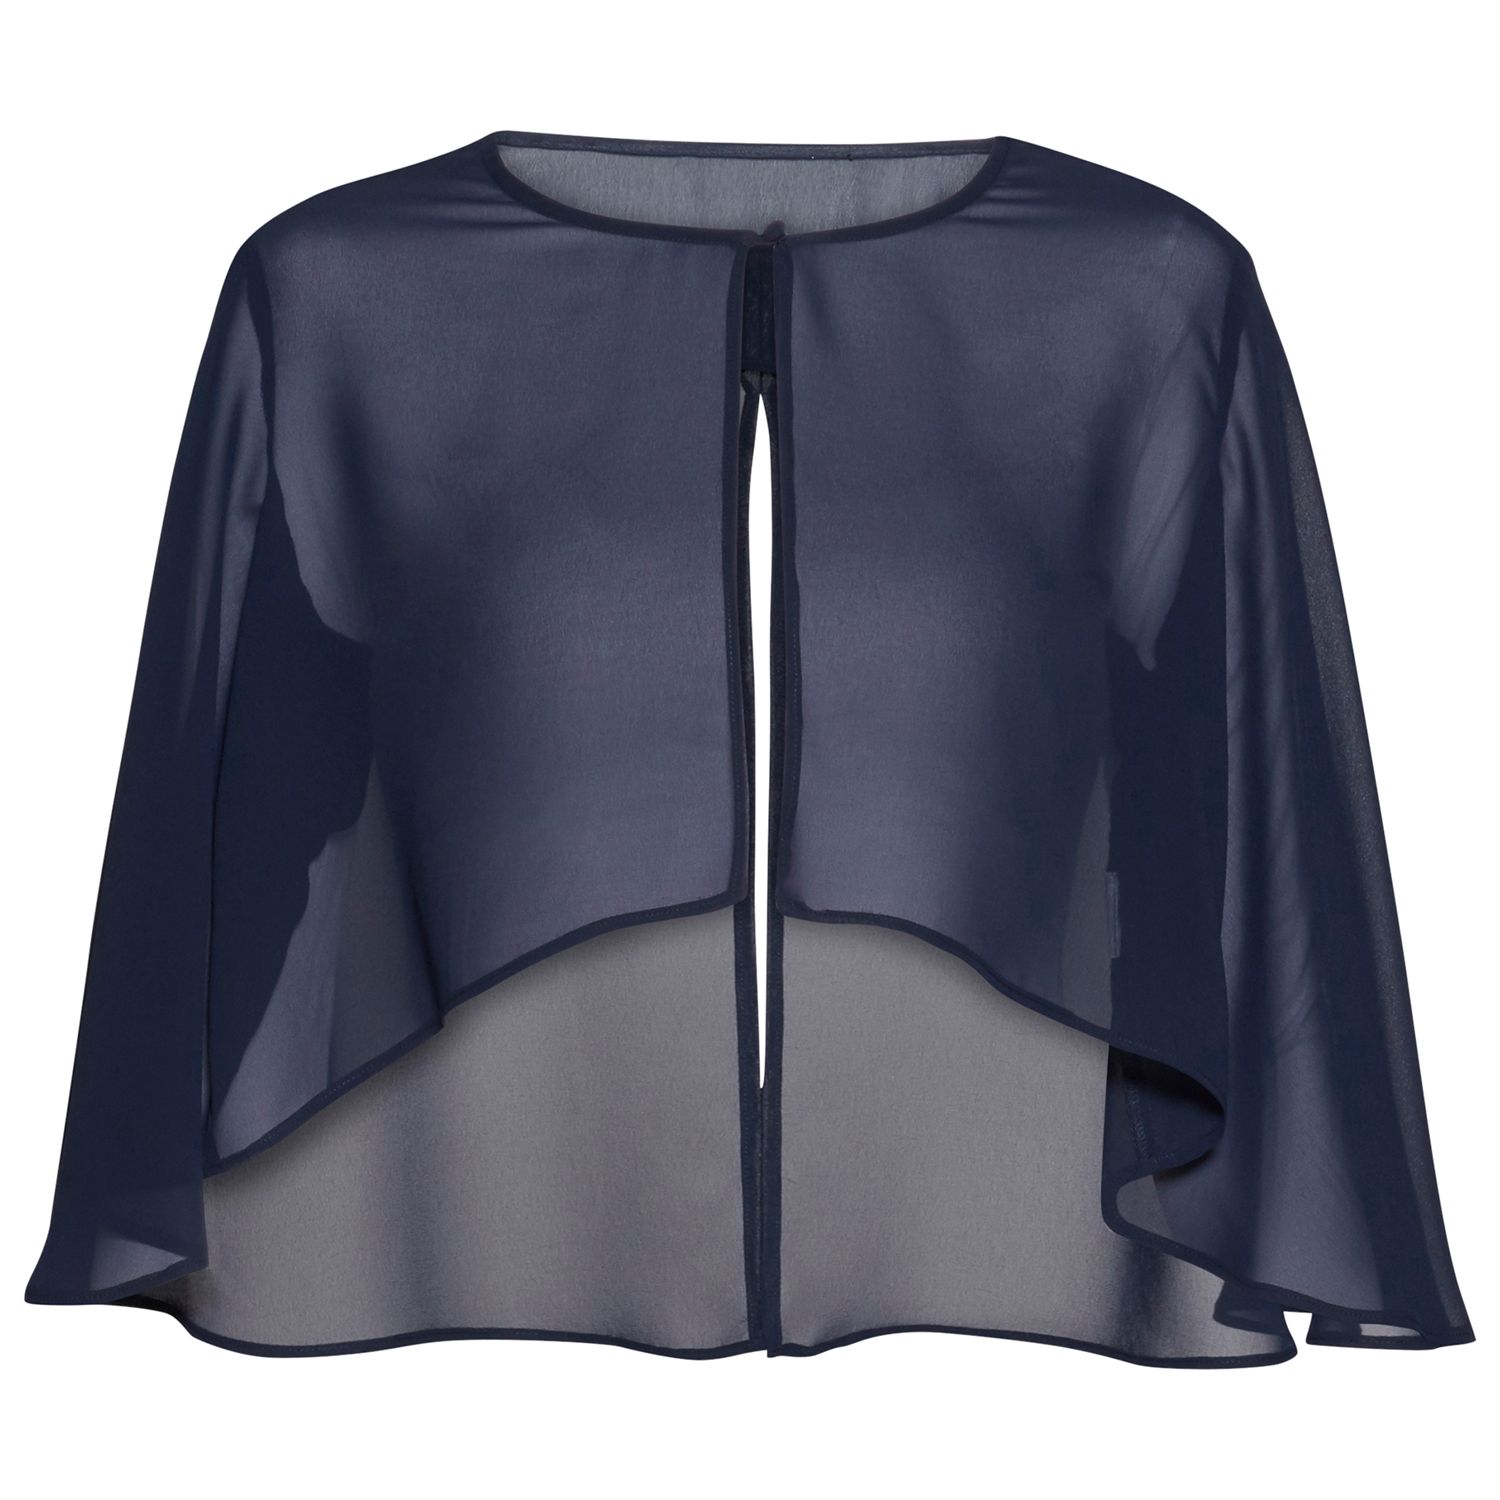 Gina Bacconi Chiffon Cape With Open Back Detail, Spring Navy, 12